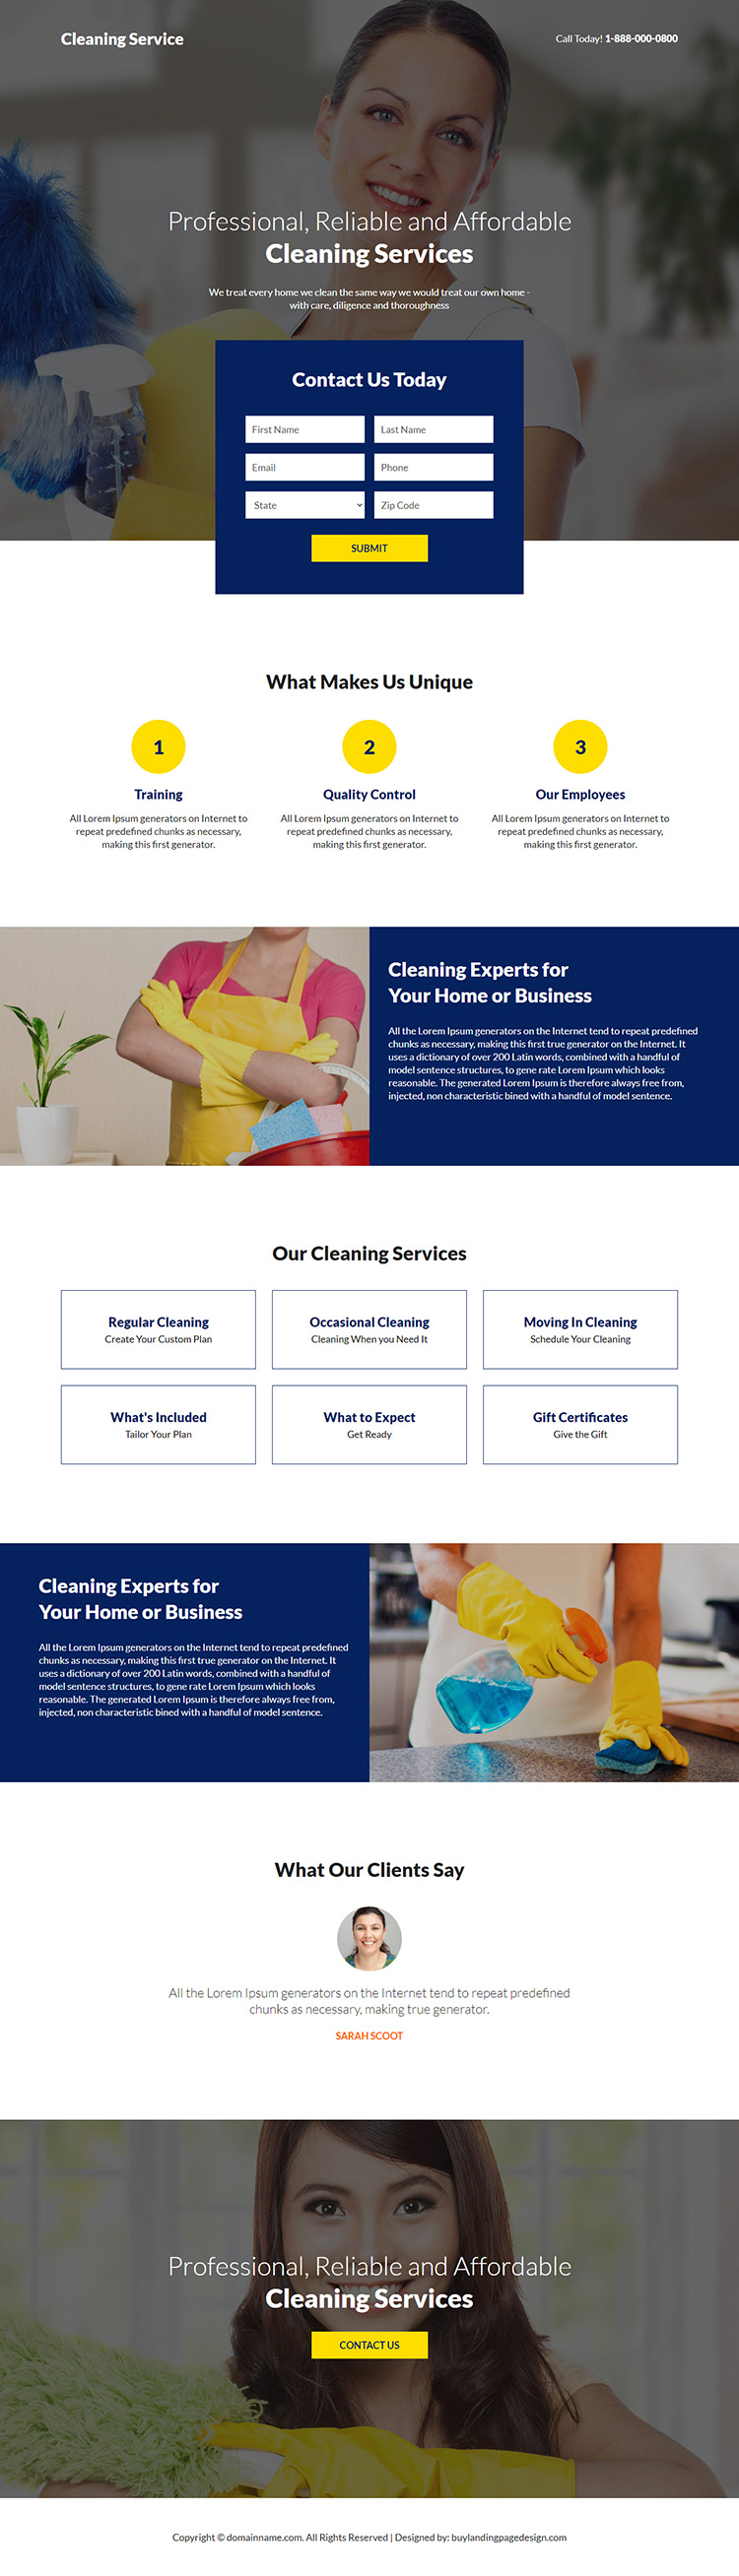 affordable cleaning service provider responsive landing page